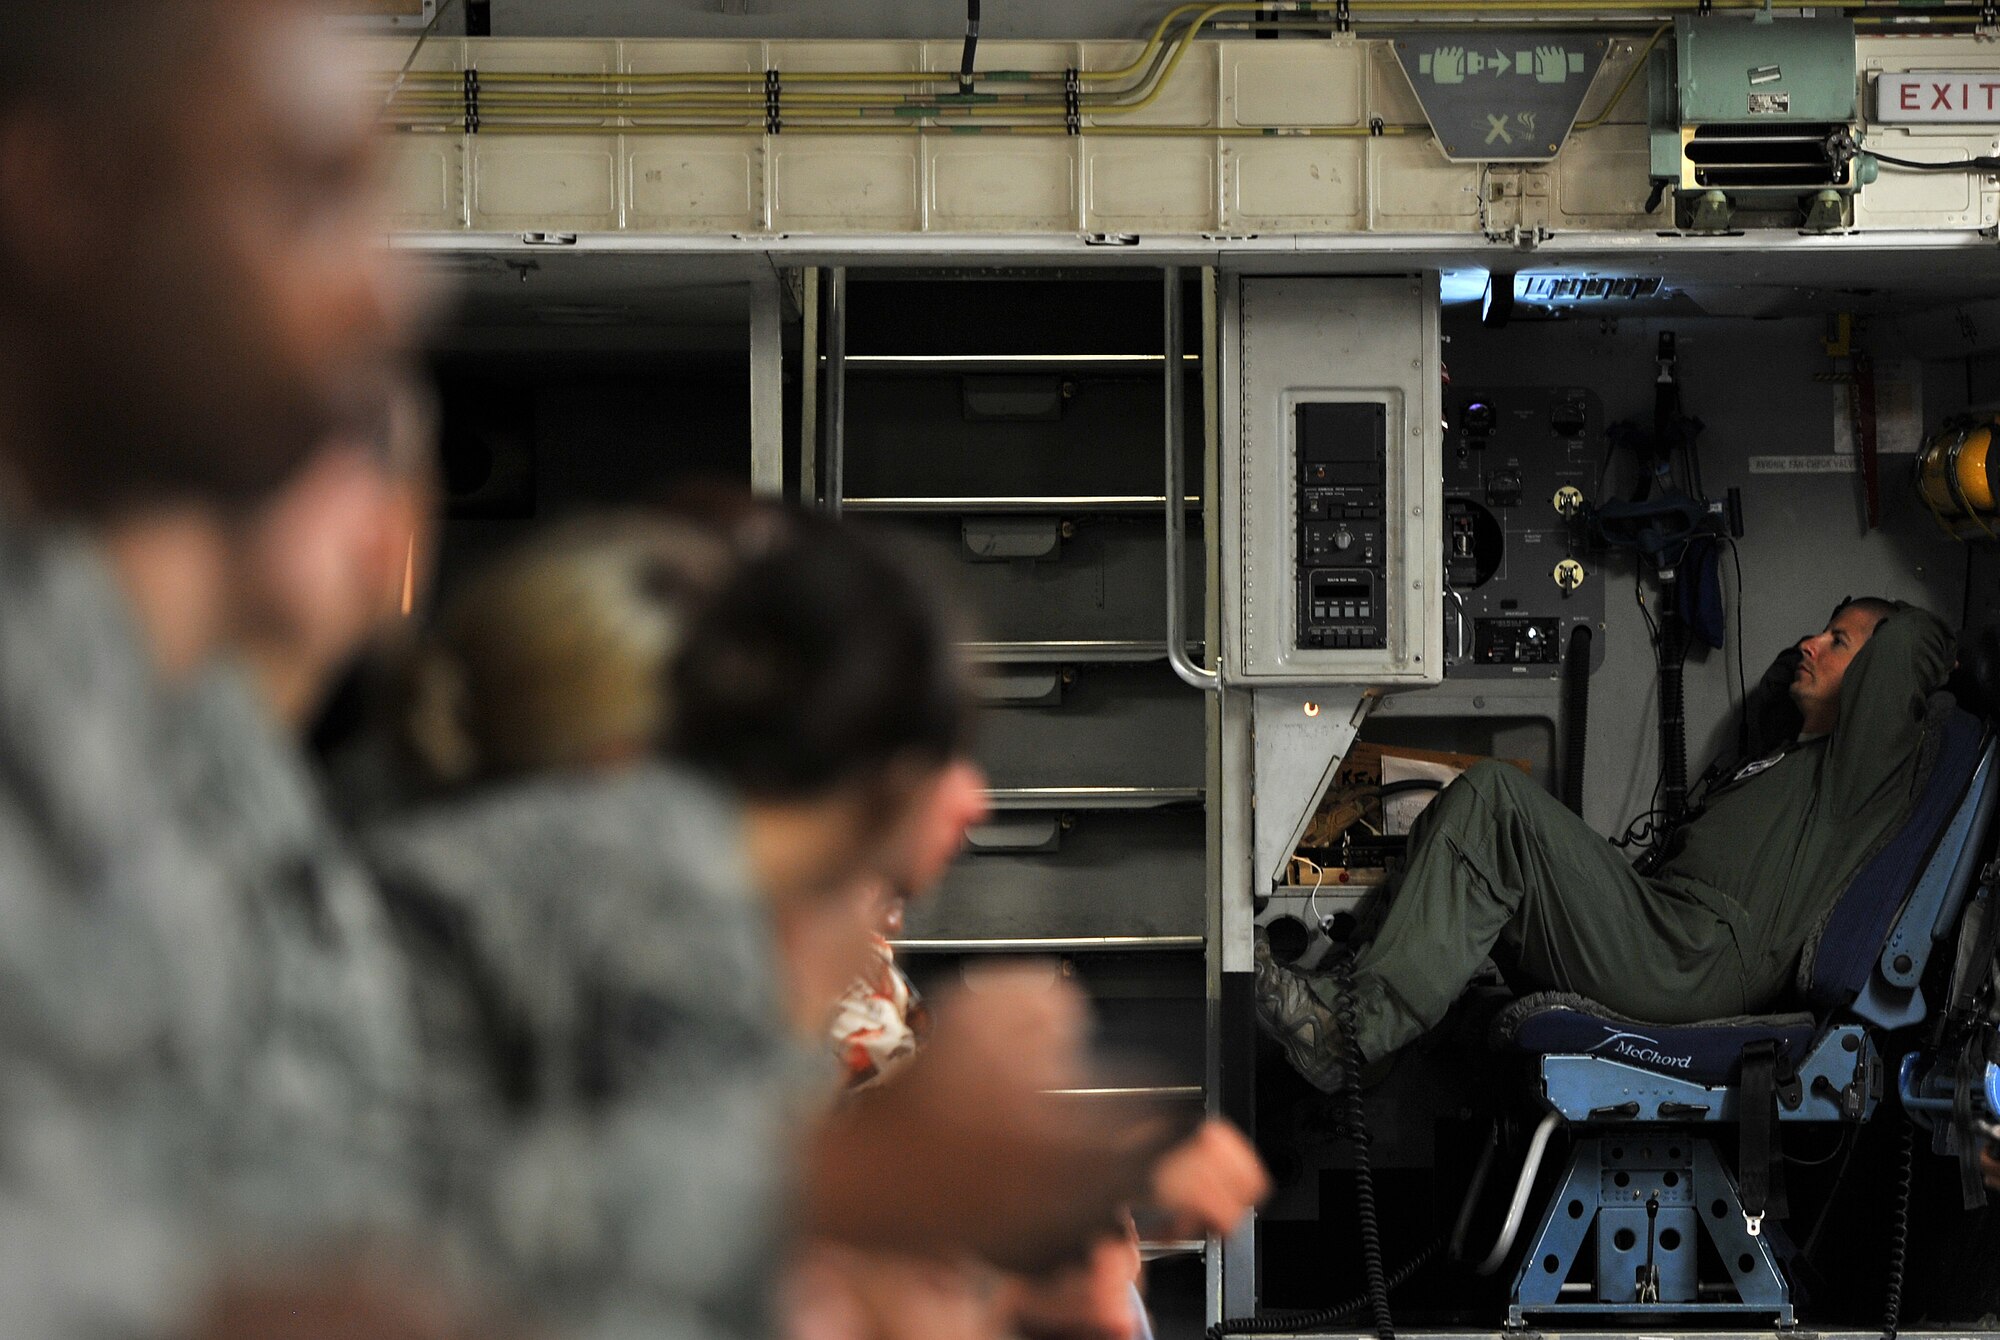 Tech. Sgt. Jack Metzger, 97th Training Squadron C-17A evaluator loadmaster, relaxes following takeoff during an incentive flight for Airmen and civilians assigned to Keesler Air Force Base, Miss., Aug. 4, 2016. The incentive flight was part of a weeklong hurricane exercise to prepare Keesler for the current hurricane season. (U.S. Air Force photo by Senior Airman Duncan McElroy/Released)